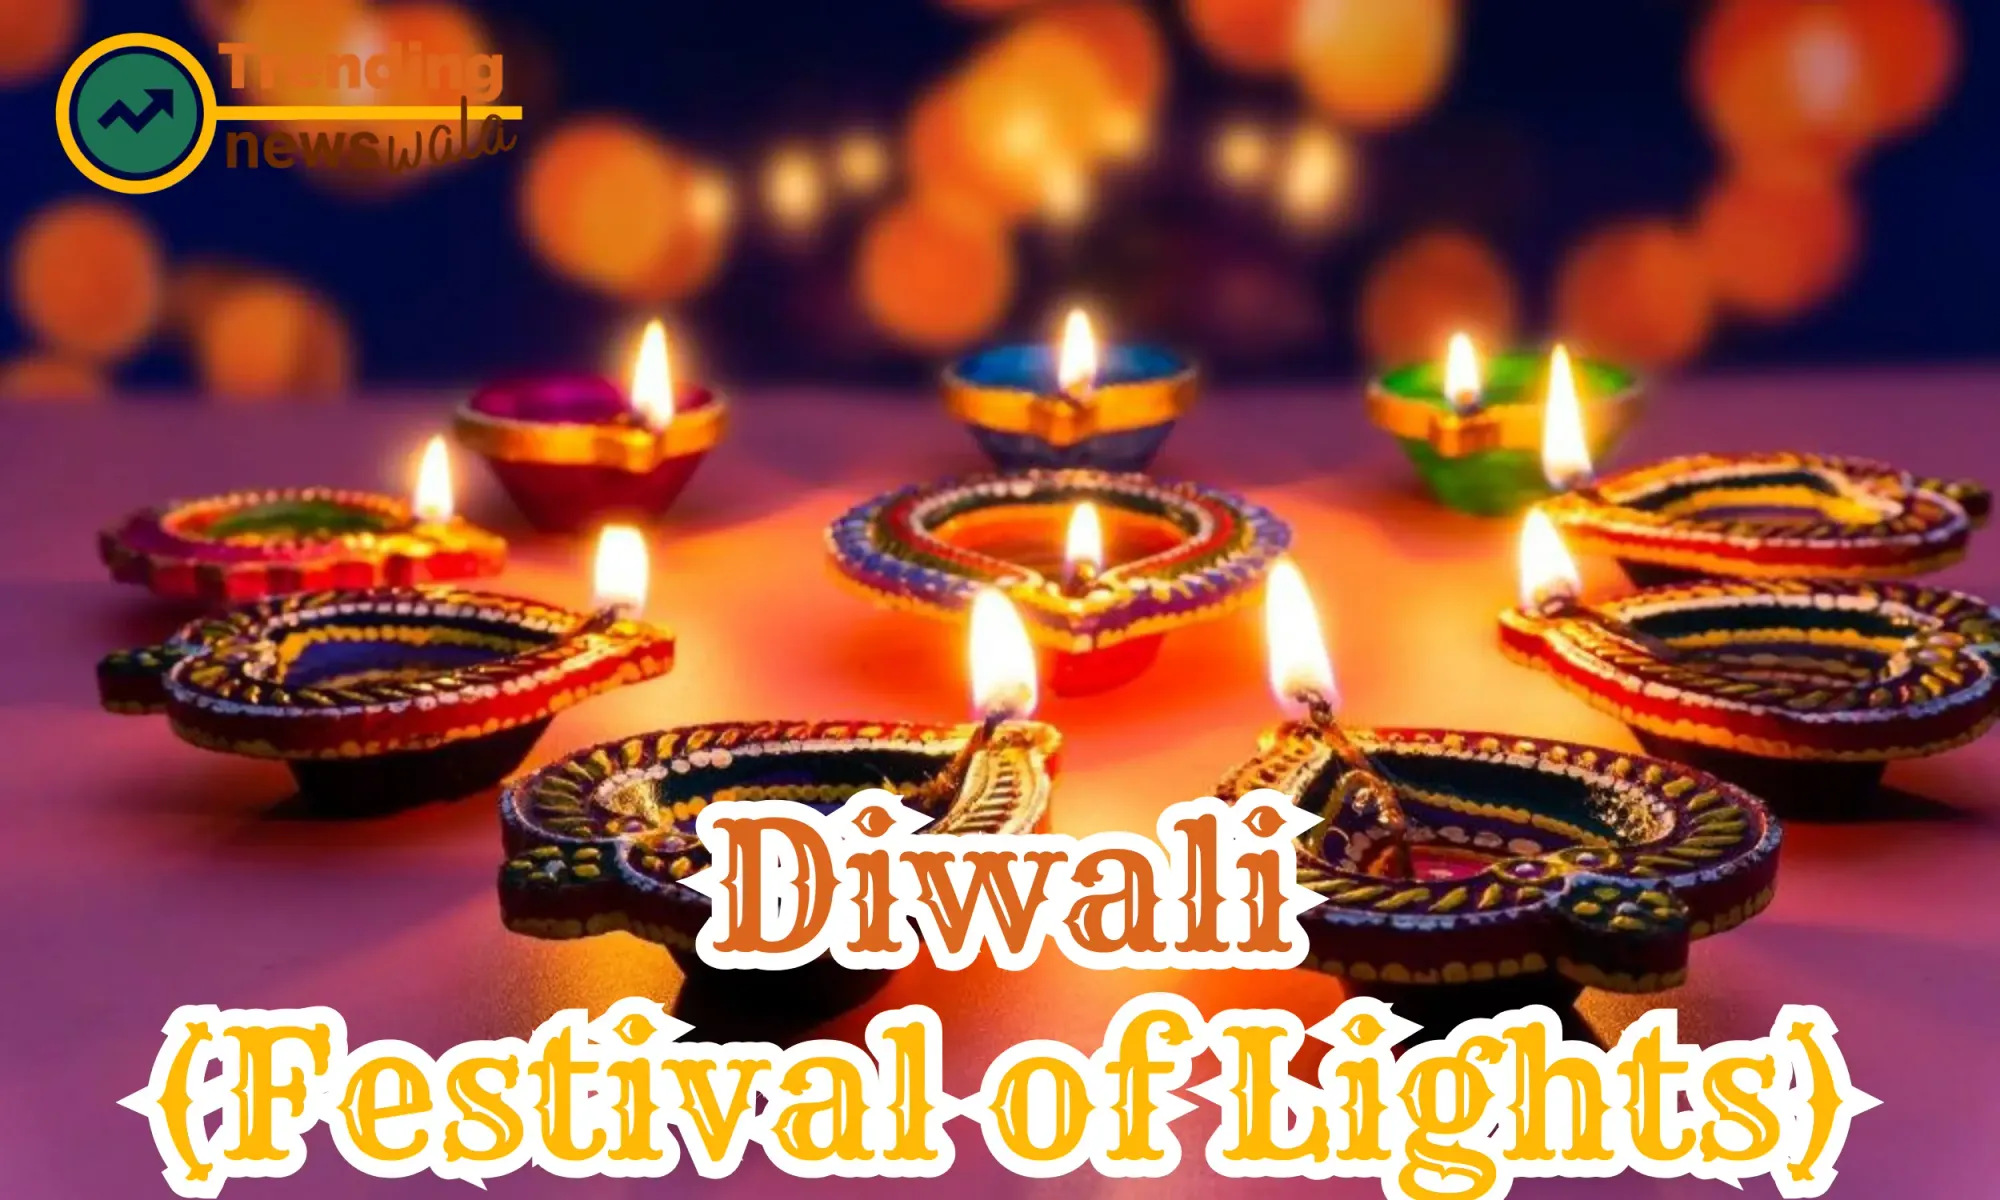 Diwali, also known as Deepavali, is one of the most anticipated and widely celebrated festivals in India